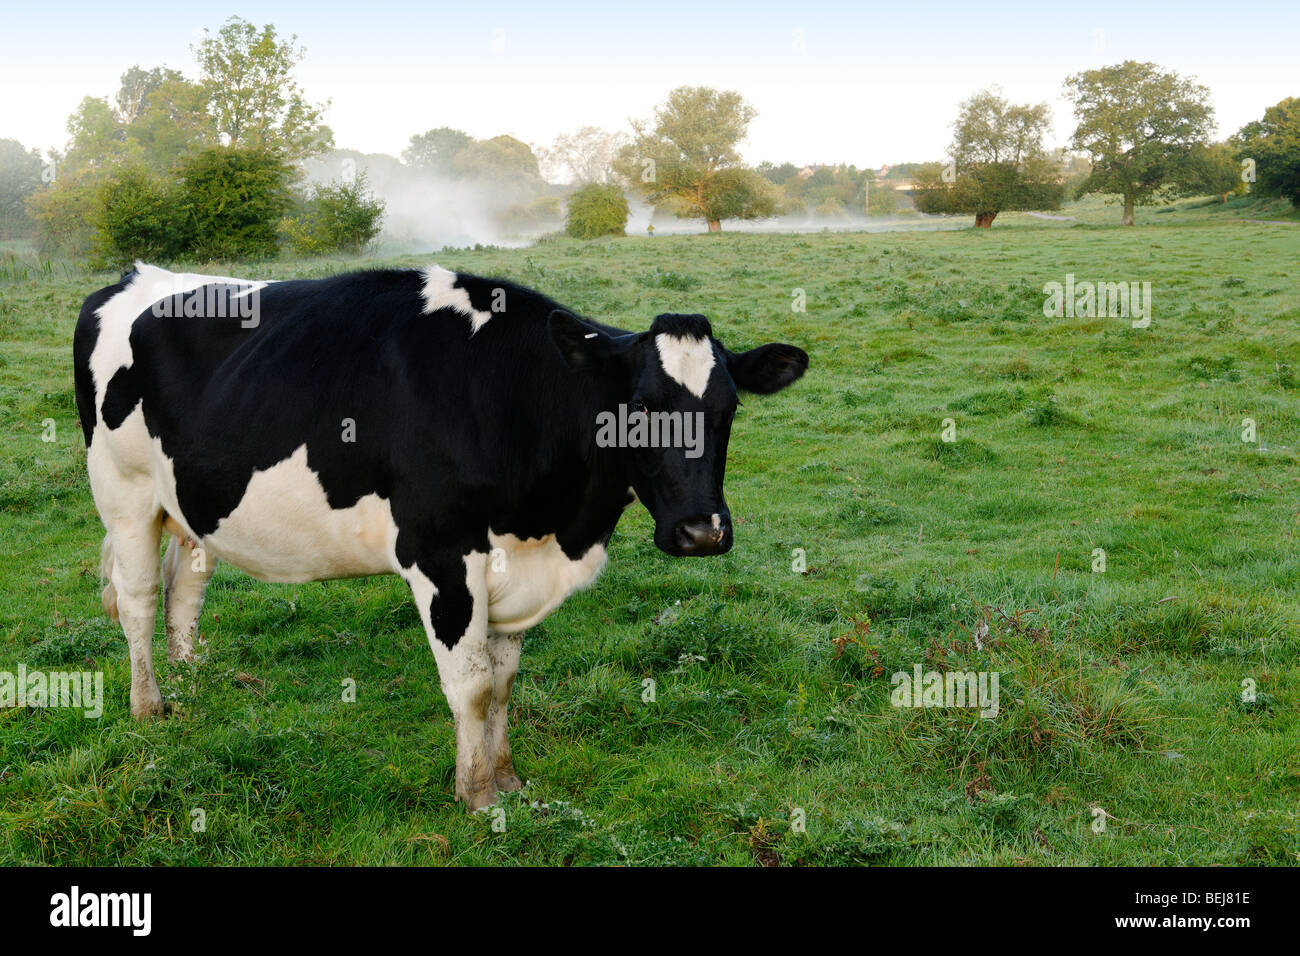 Dairy cow in early morning mist Stock Photo